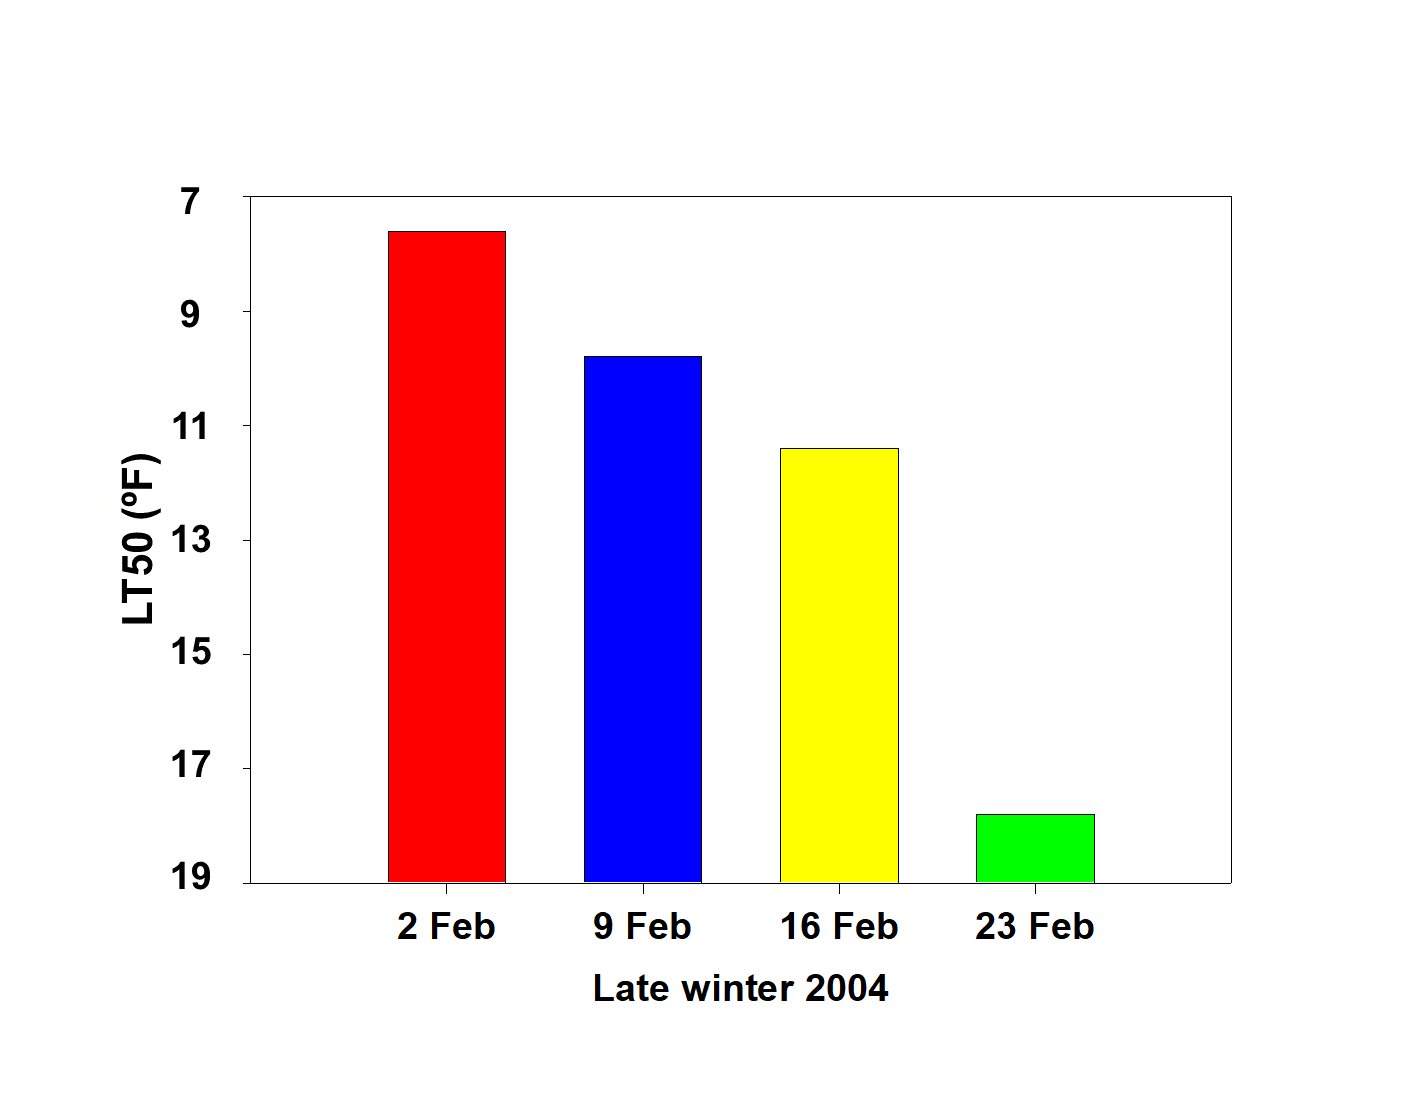 Figure 2. De-acclimation (loss in cold hardiness) in late winter with perennial ryegrass over a 3-week period in South Deerfield, MA (from Webster and Ebdon, 2005). 